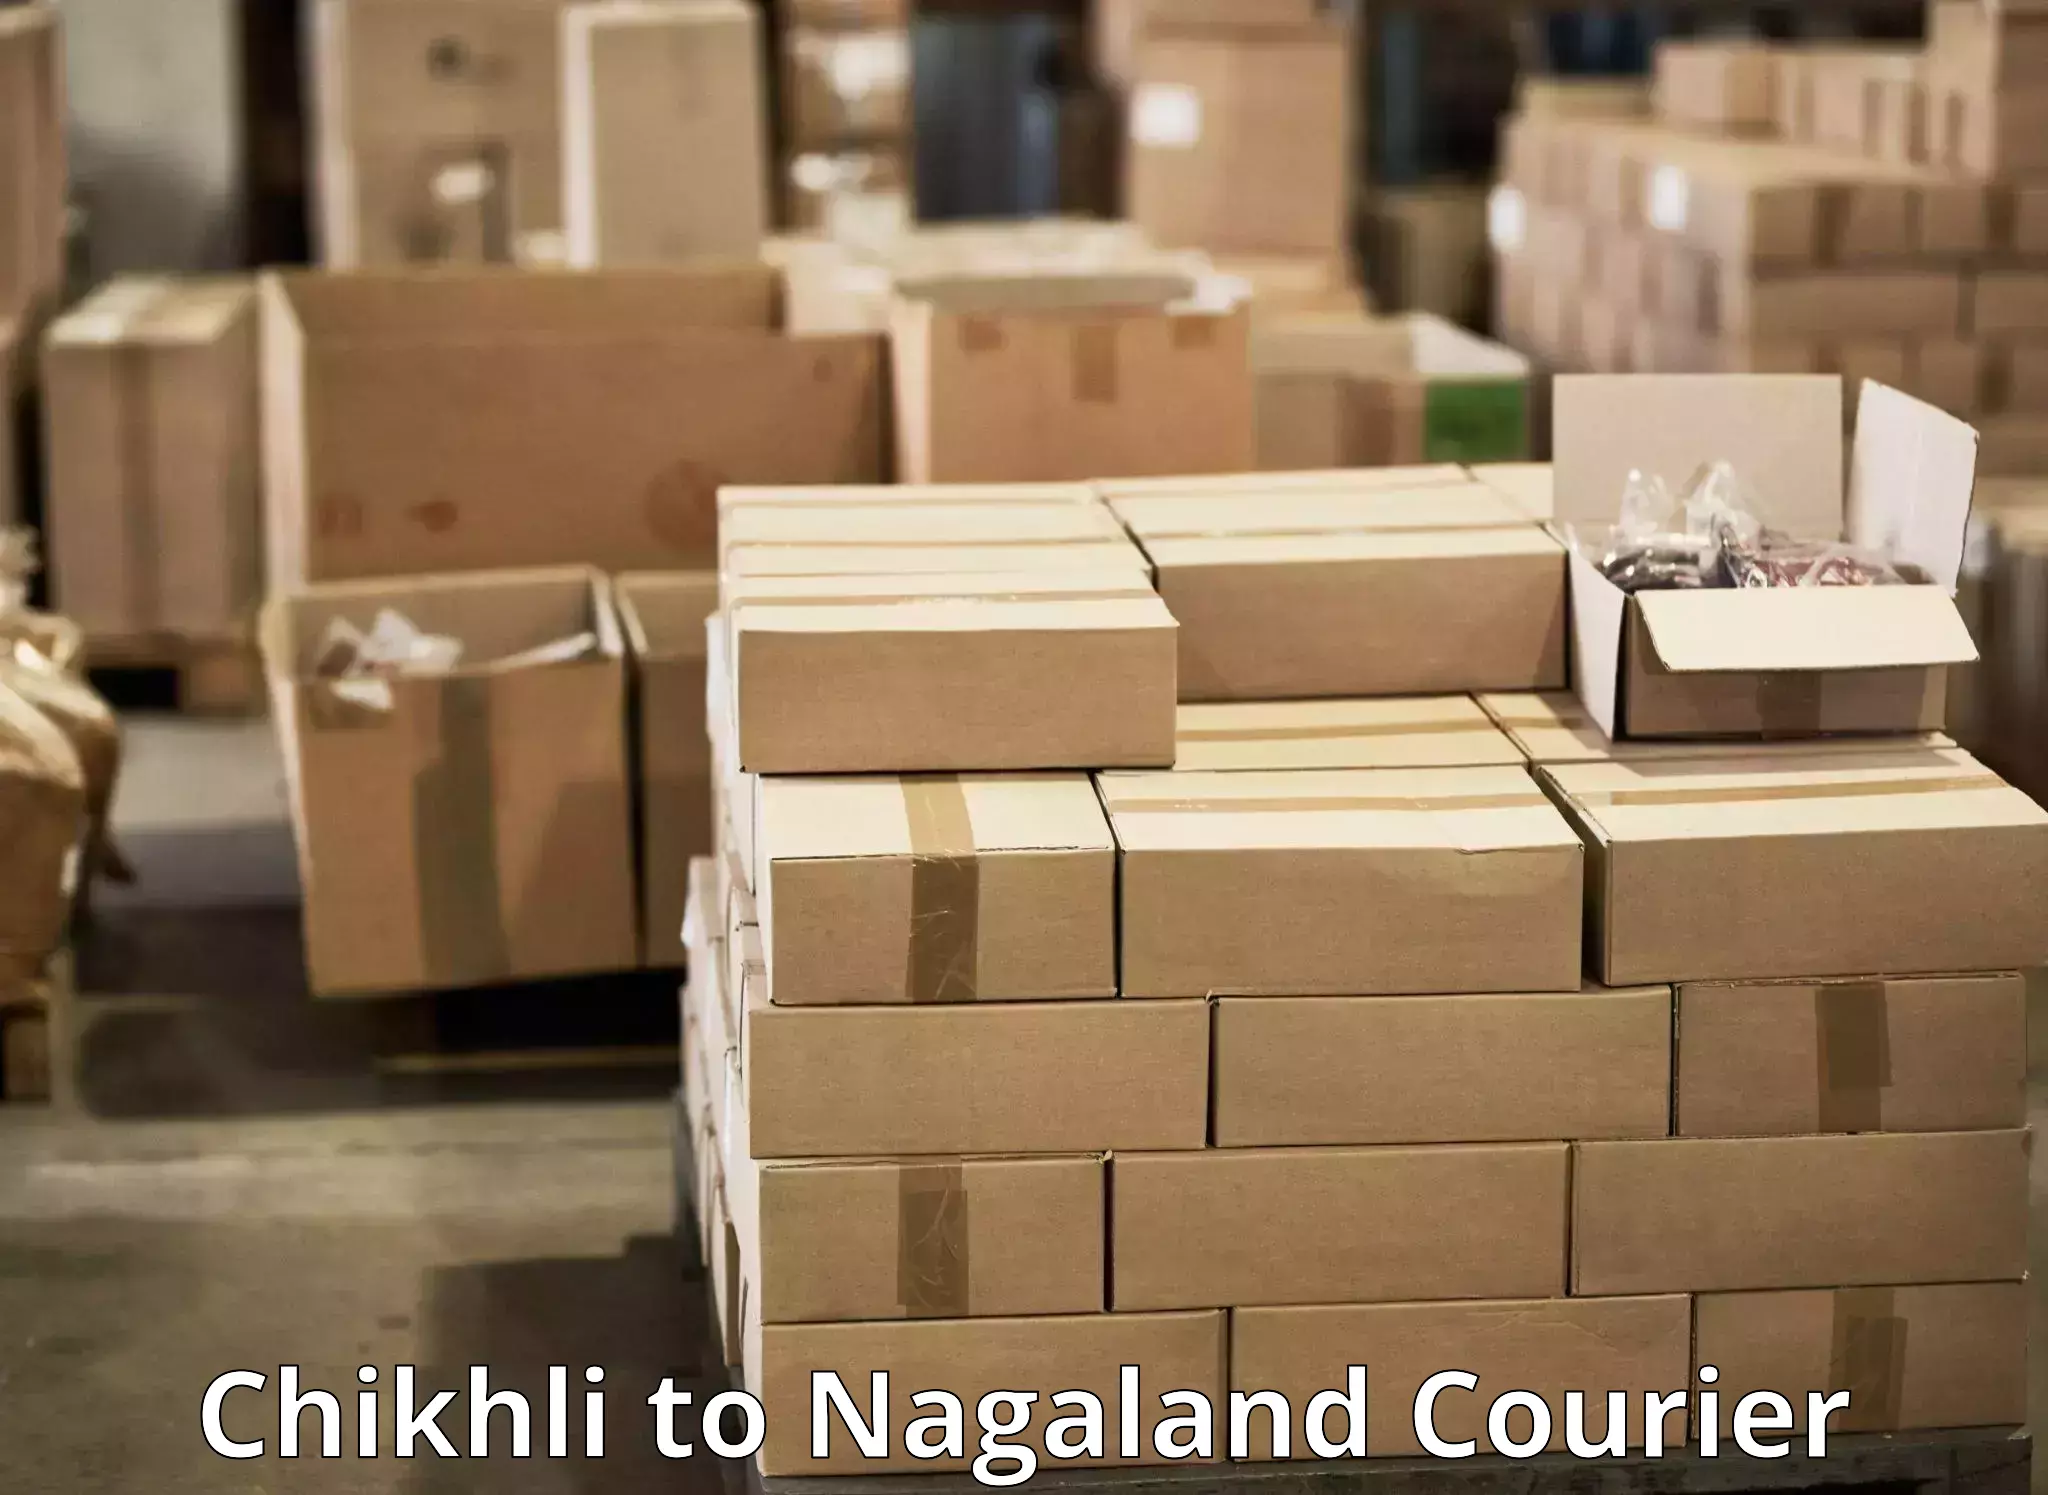 Express courier capabilities Chikhli to Nagaland